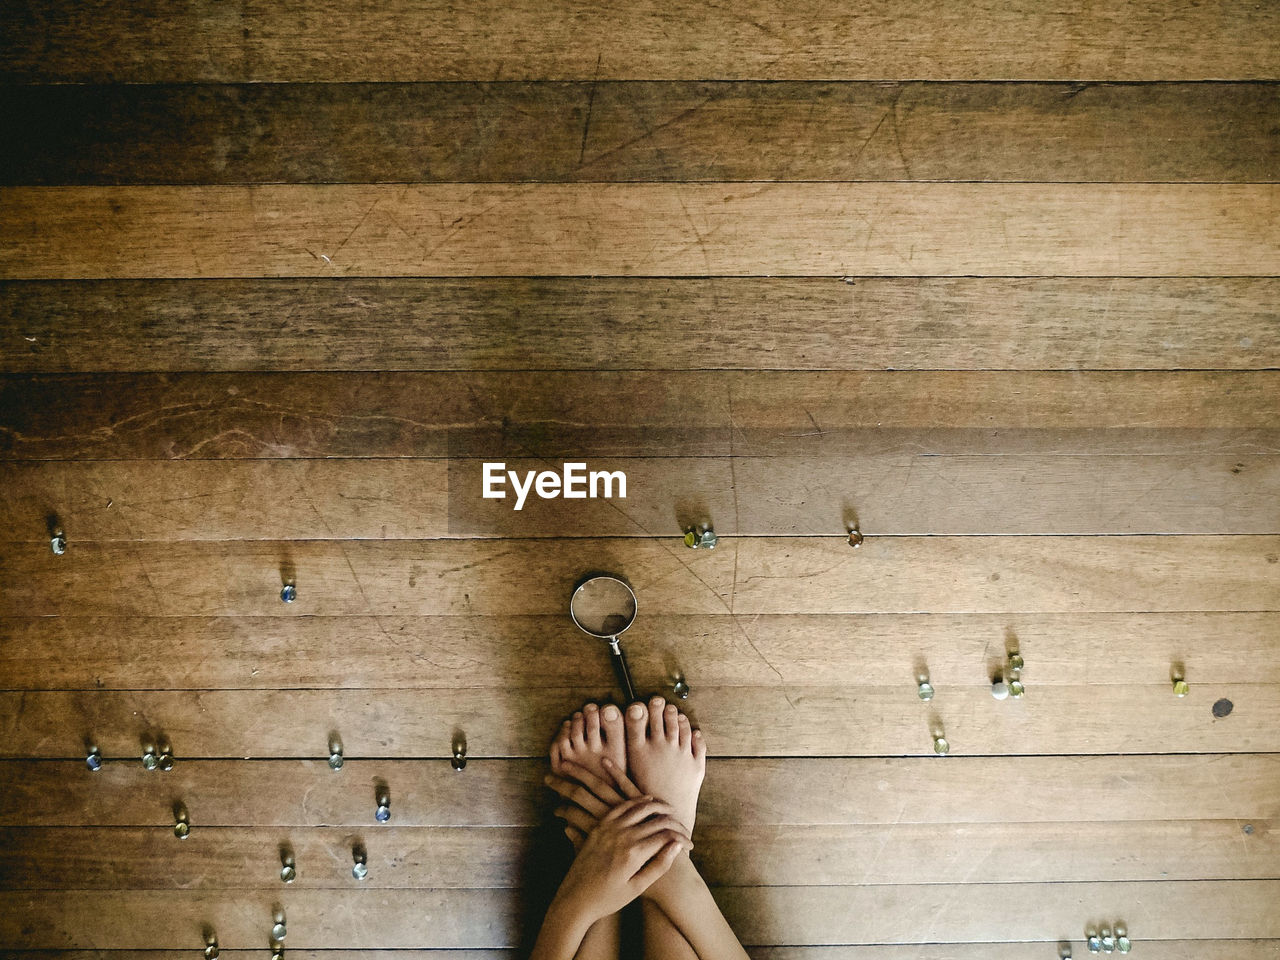 Cropped image of person crouching with marbles and magnifying glass on hardwood floor